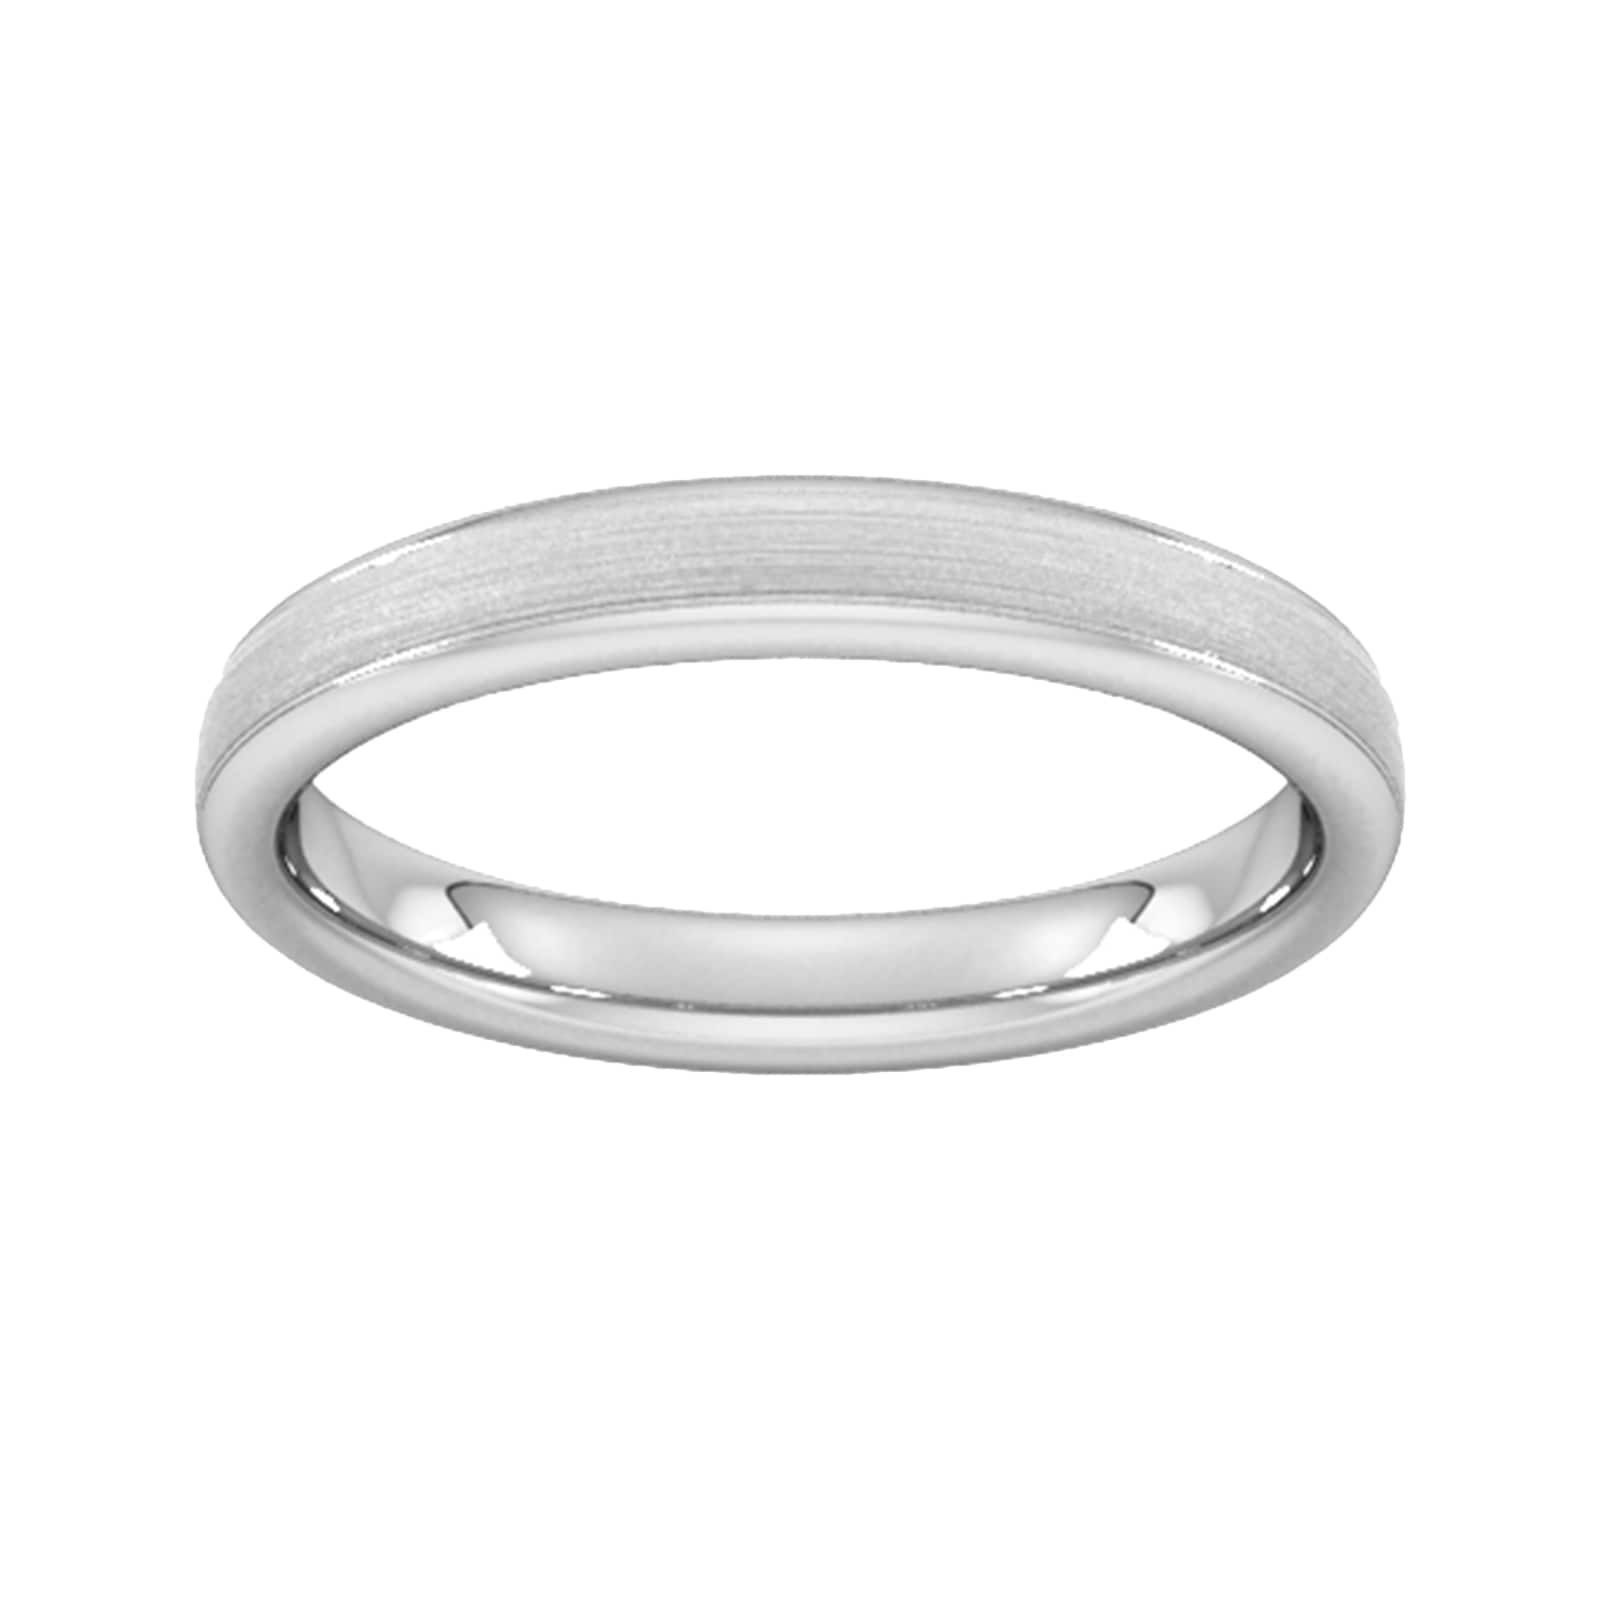 3mm Traditional Court Heavy Matt Centre With Grooves Wedding Ring In 9 Carat White Gold - Ring Size Q